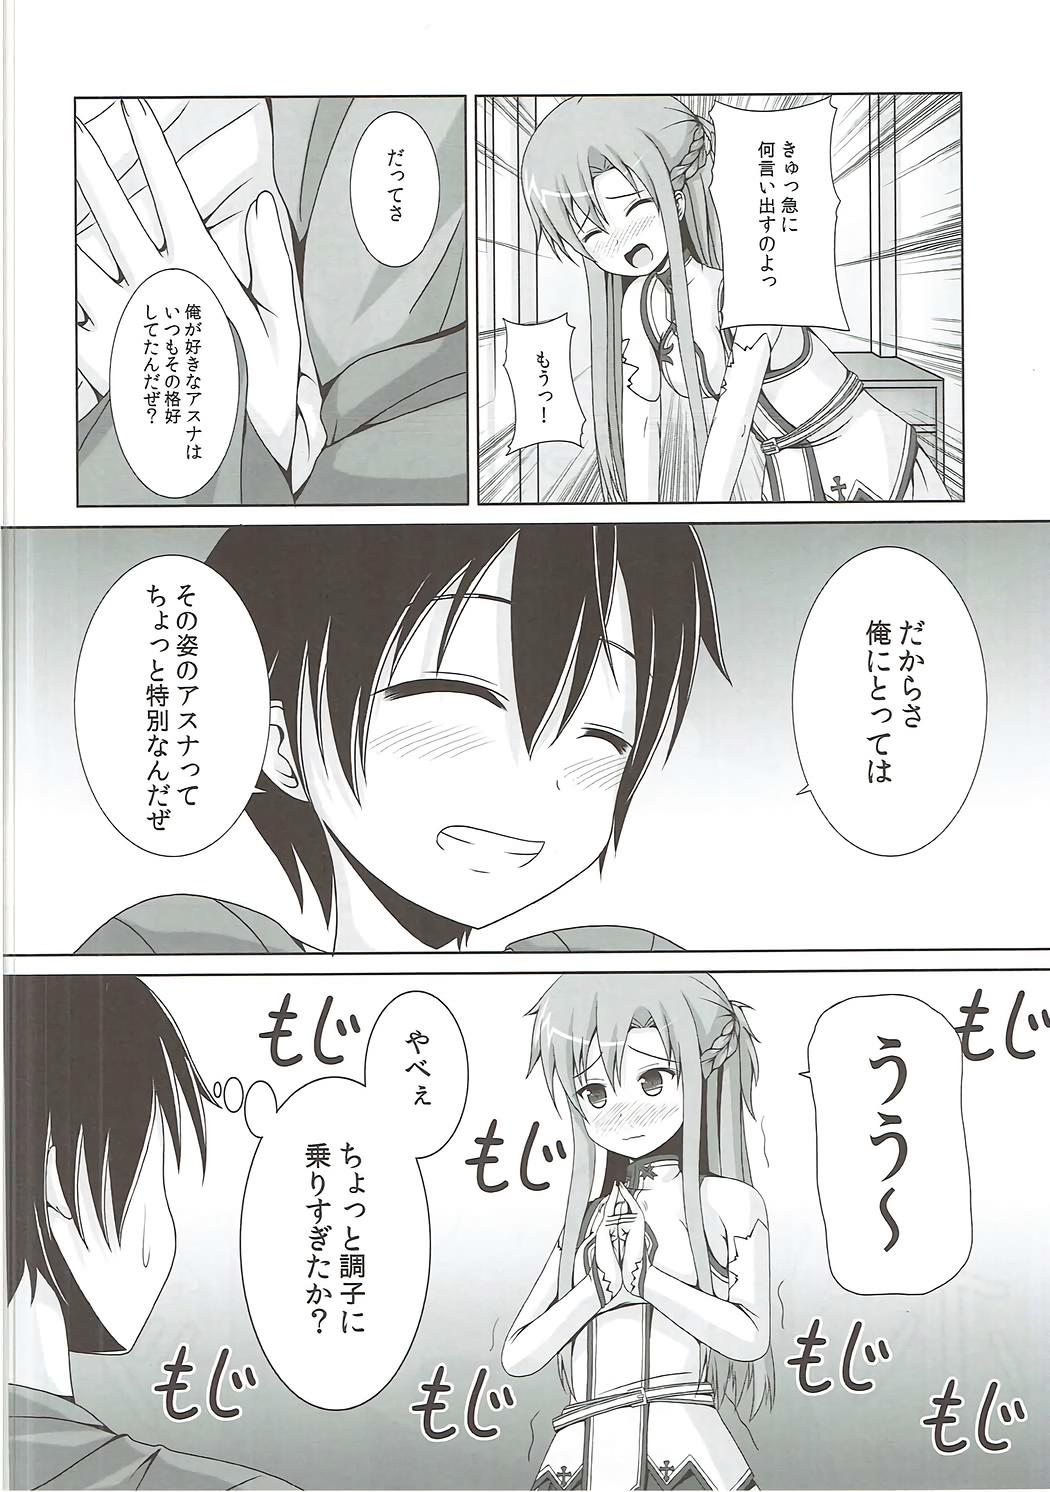 Old Young Kessen Zenjitsu no Etcetera - Sword art online Young Old - Page 7